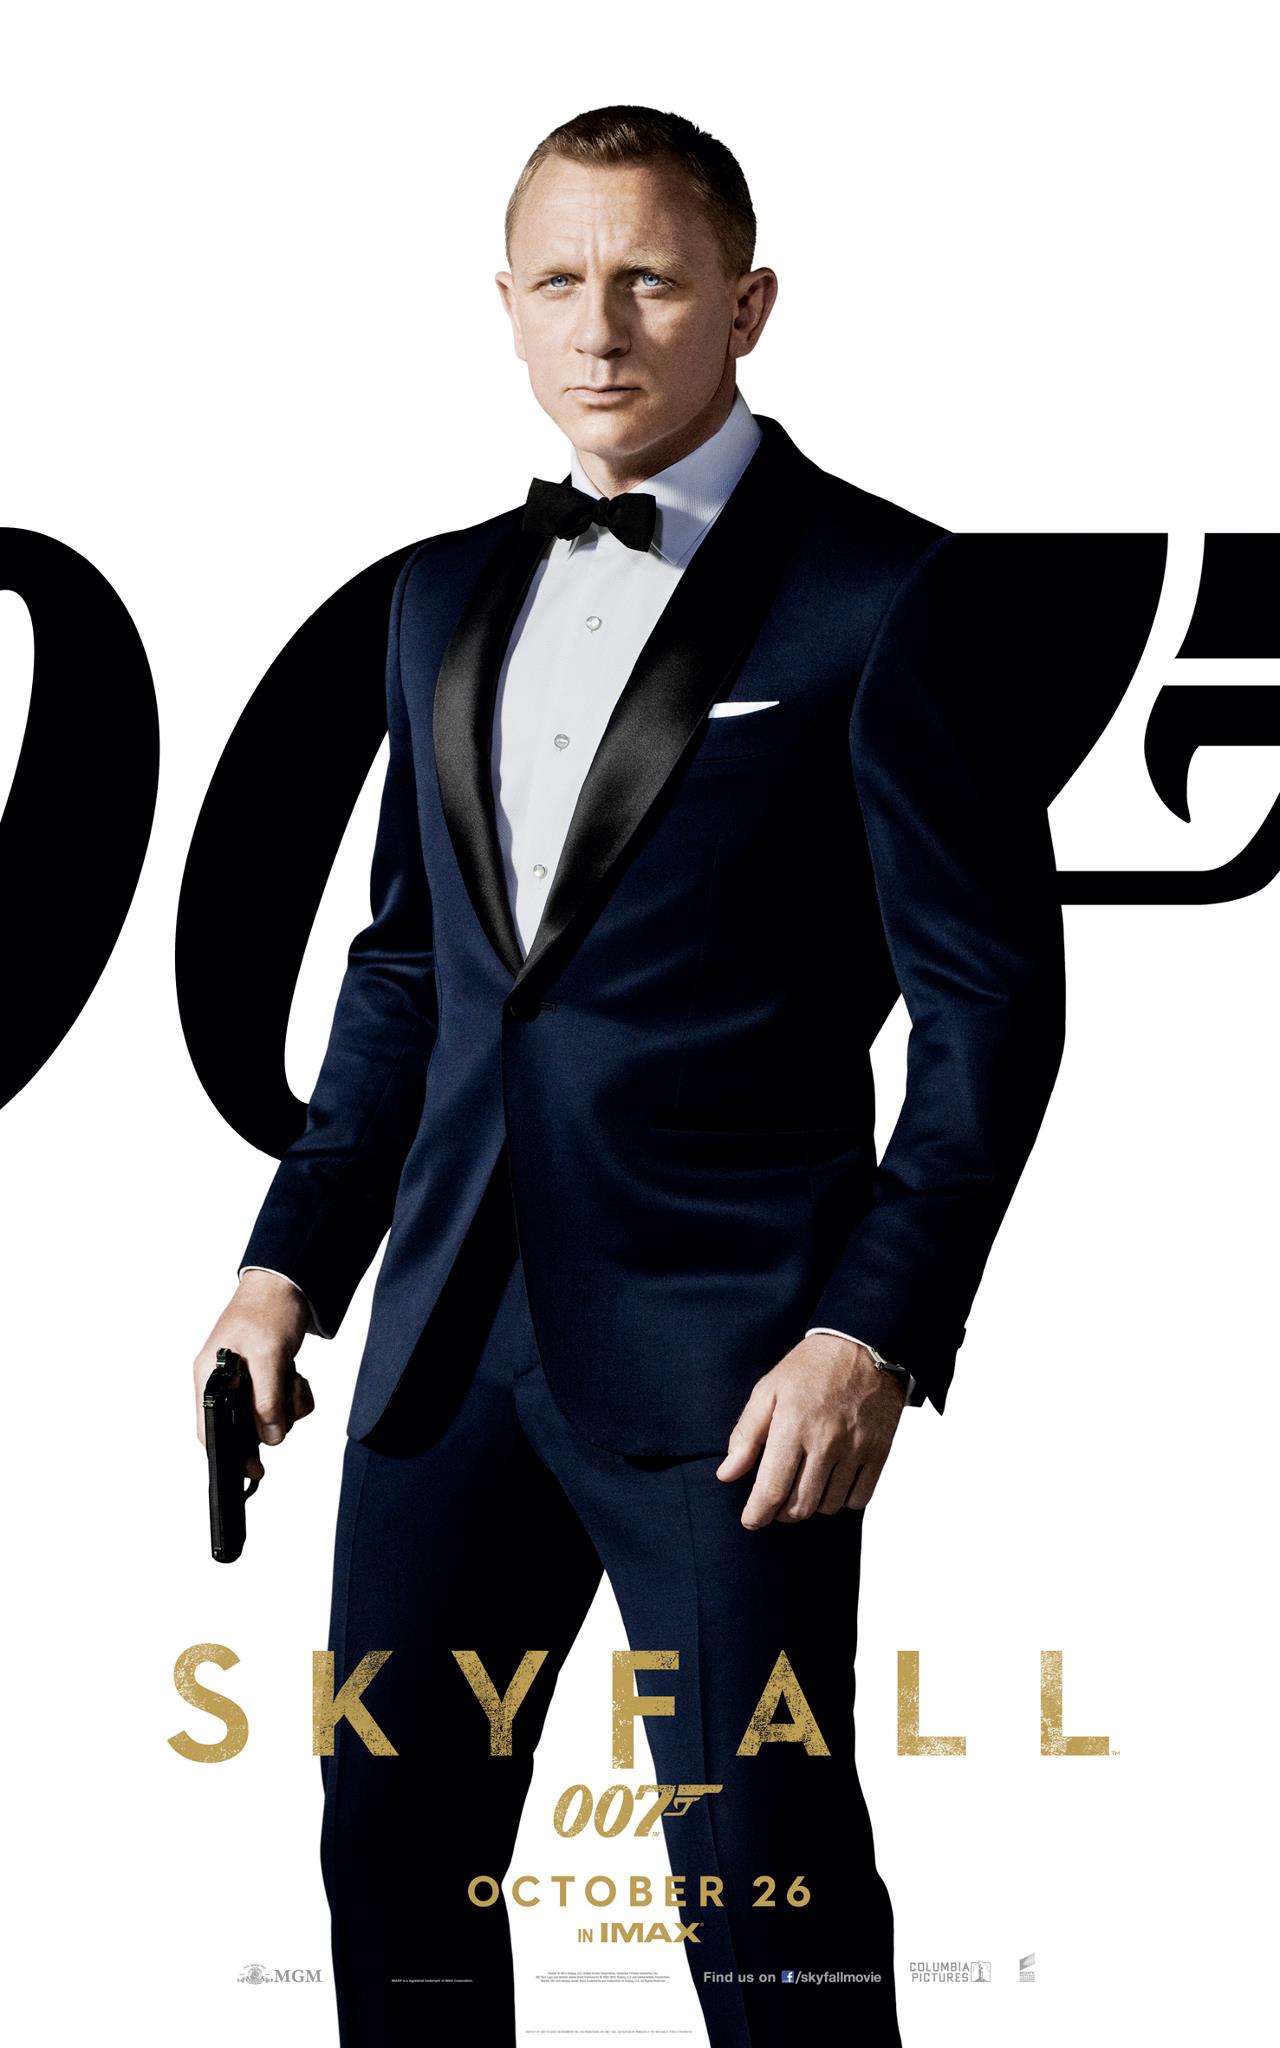 Skyfall Backgrounds, Compatible - PC, Mobile, Gadgets| 1280x2048 px